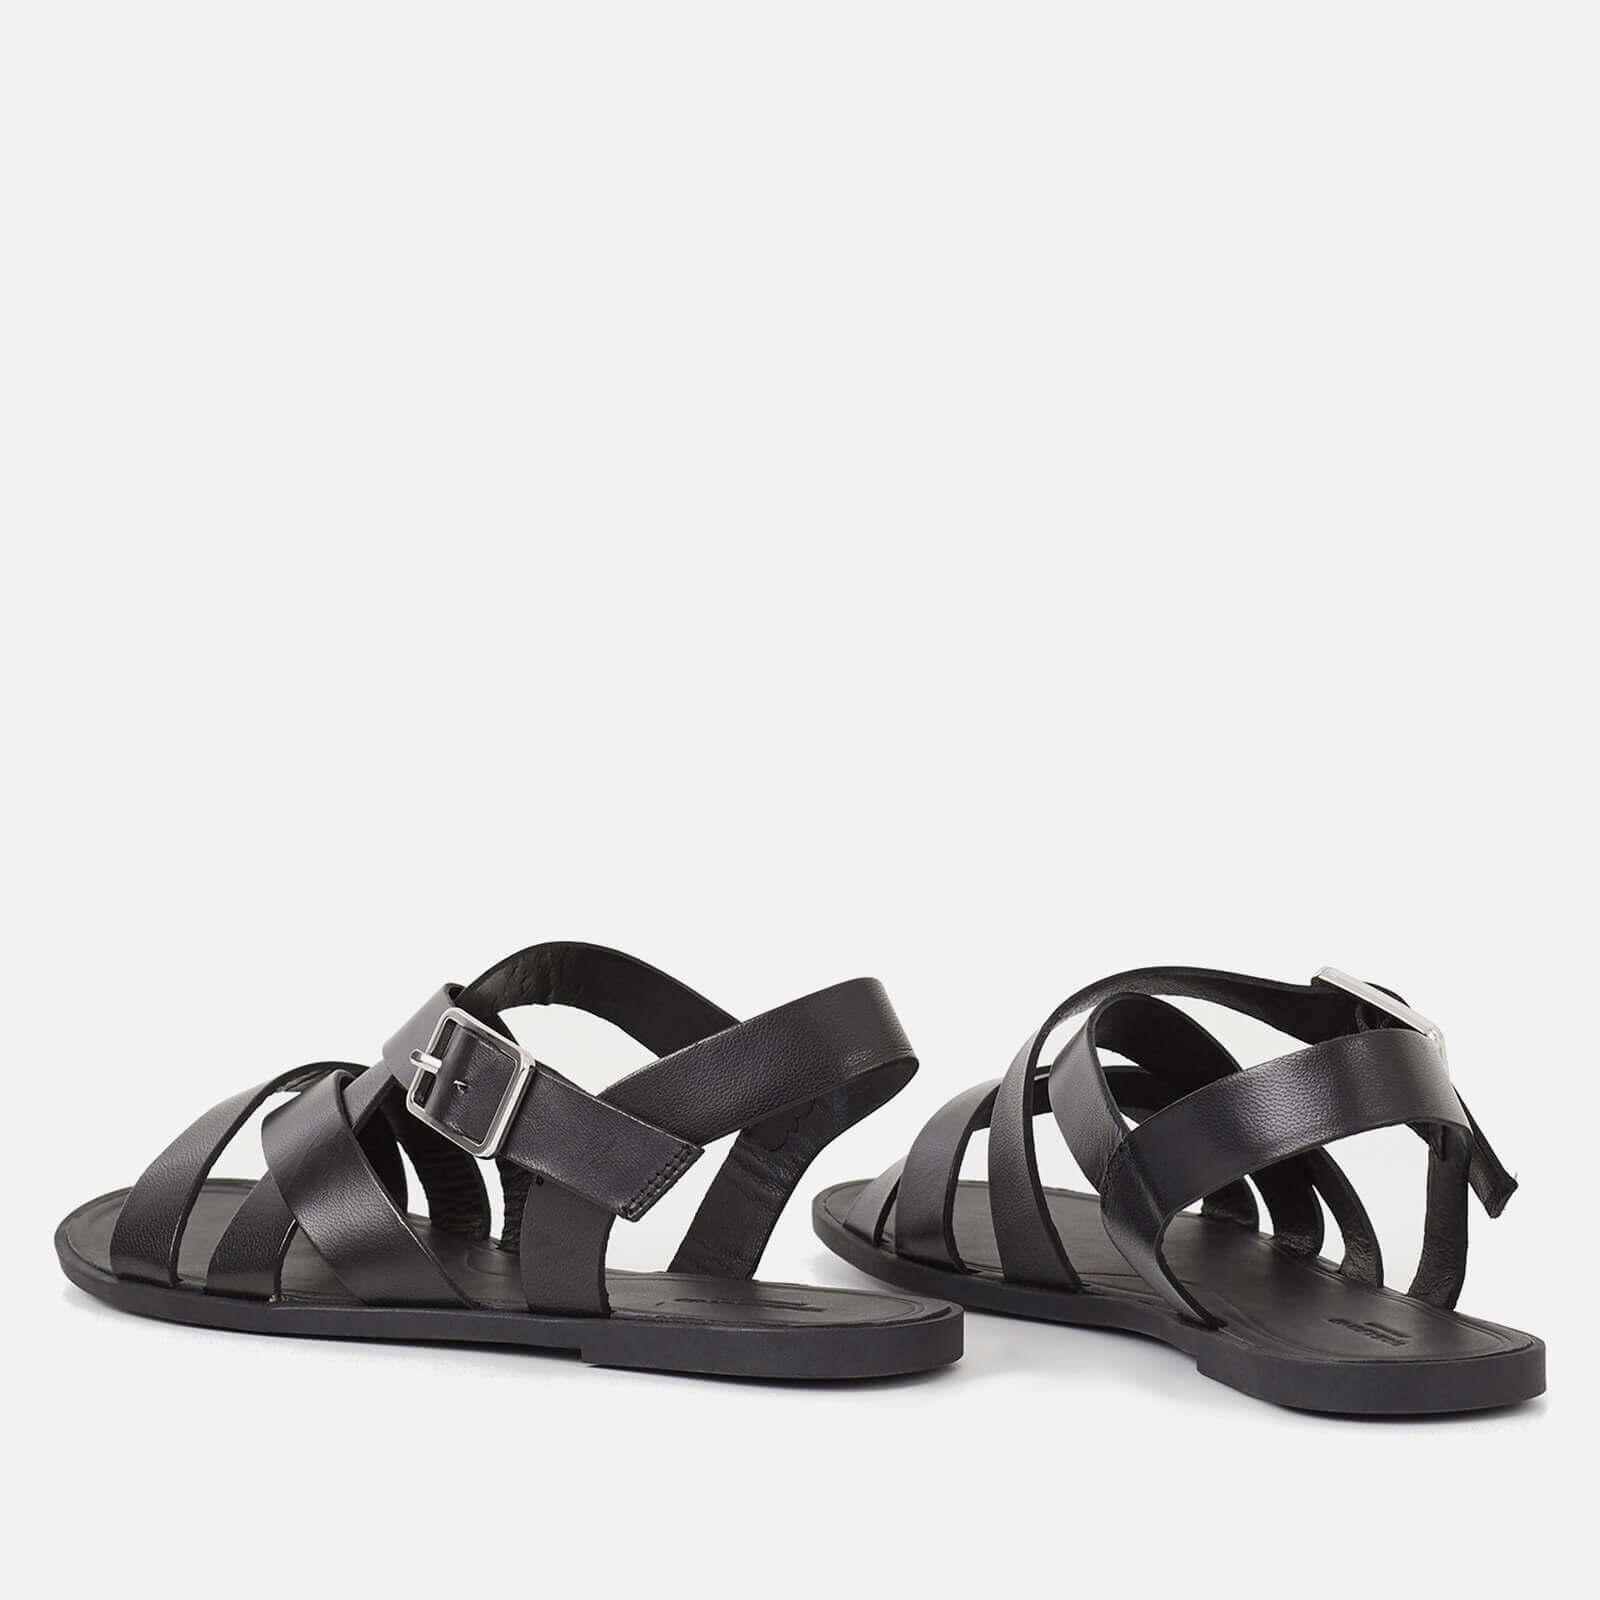 Vagabond Shoemakers Tia 2.0 Leather Sandals in Black | Lyst